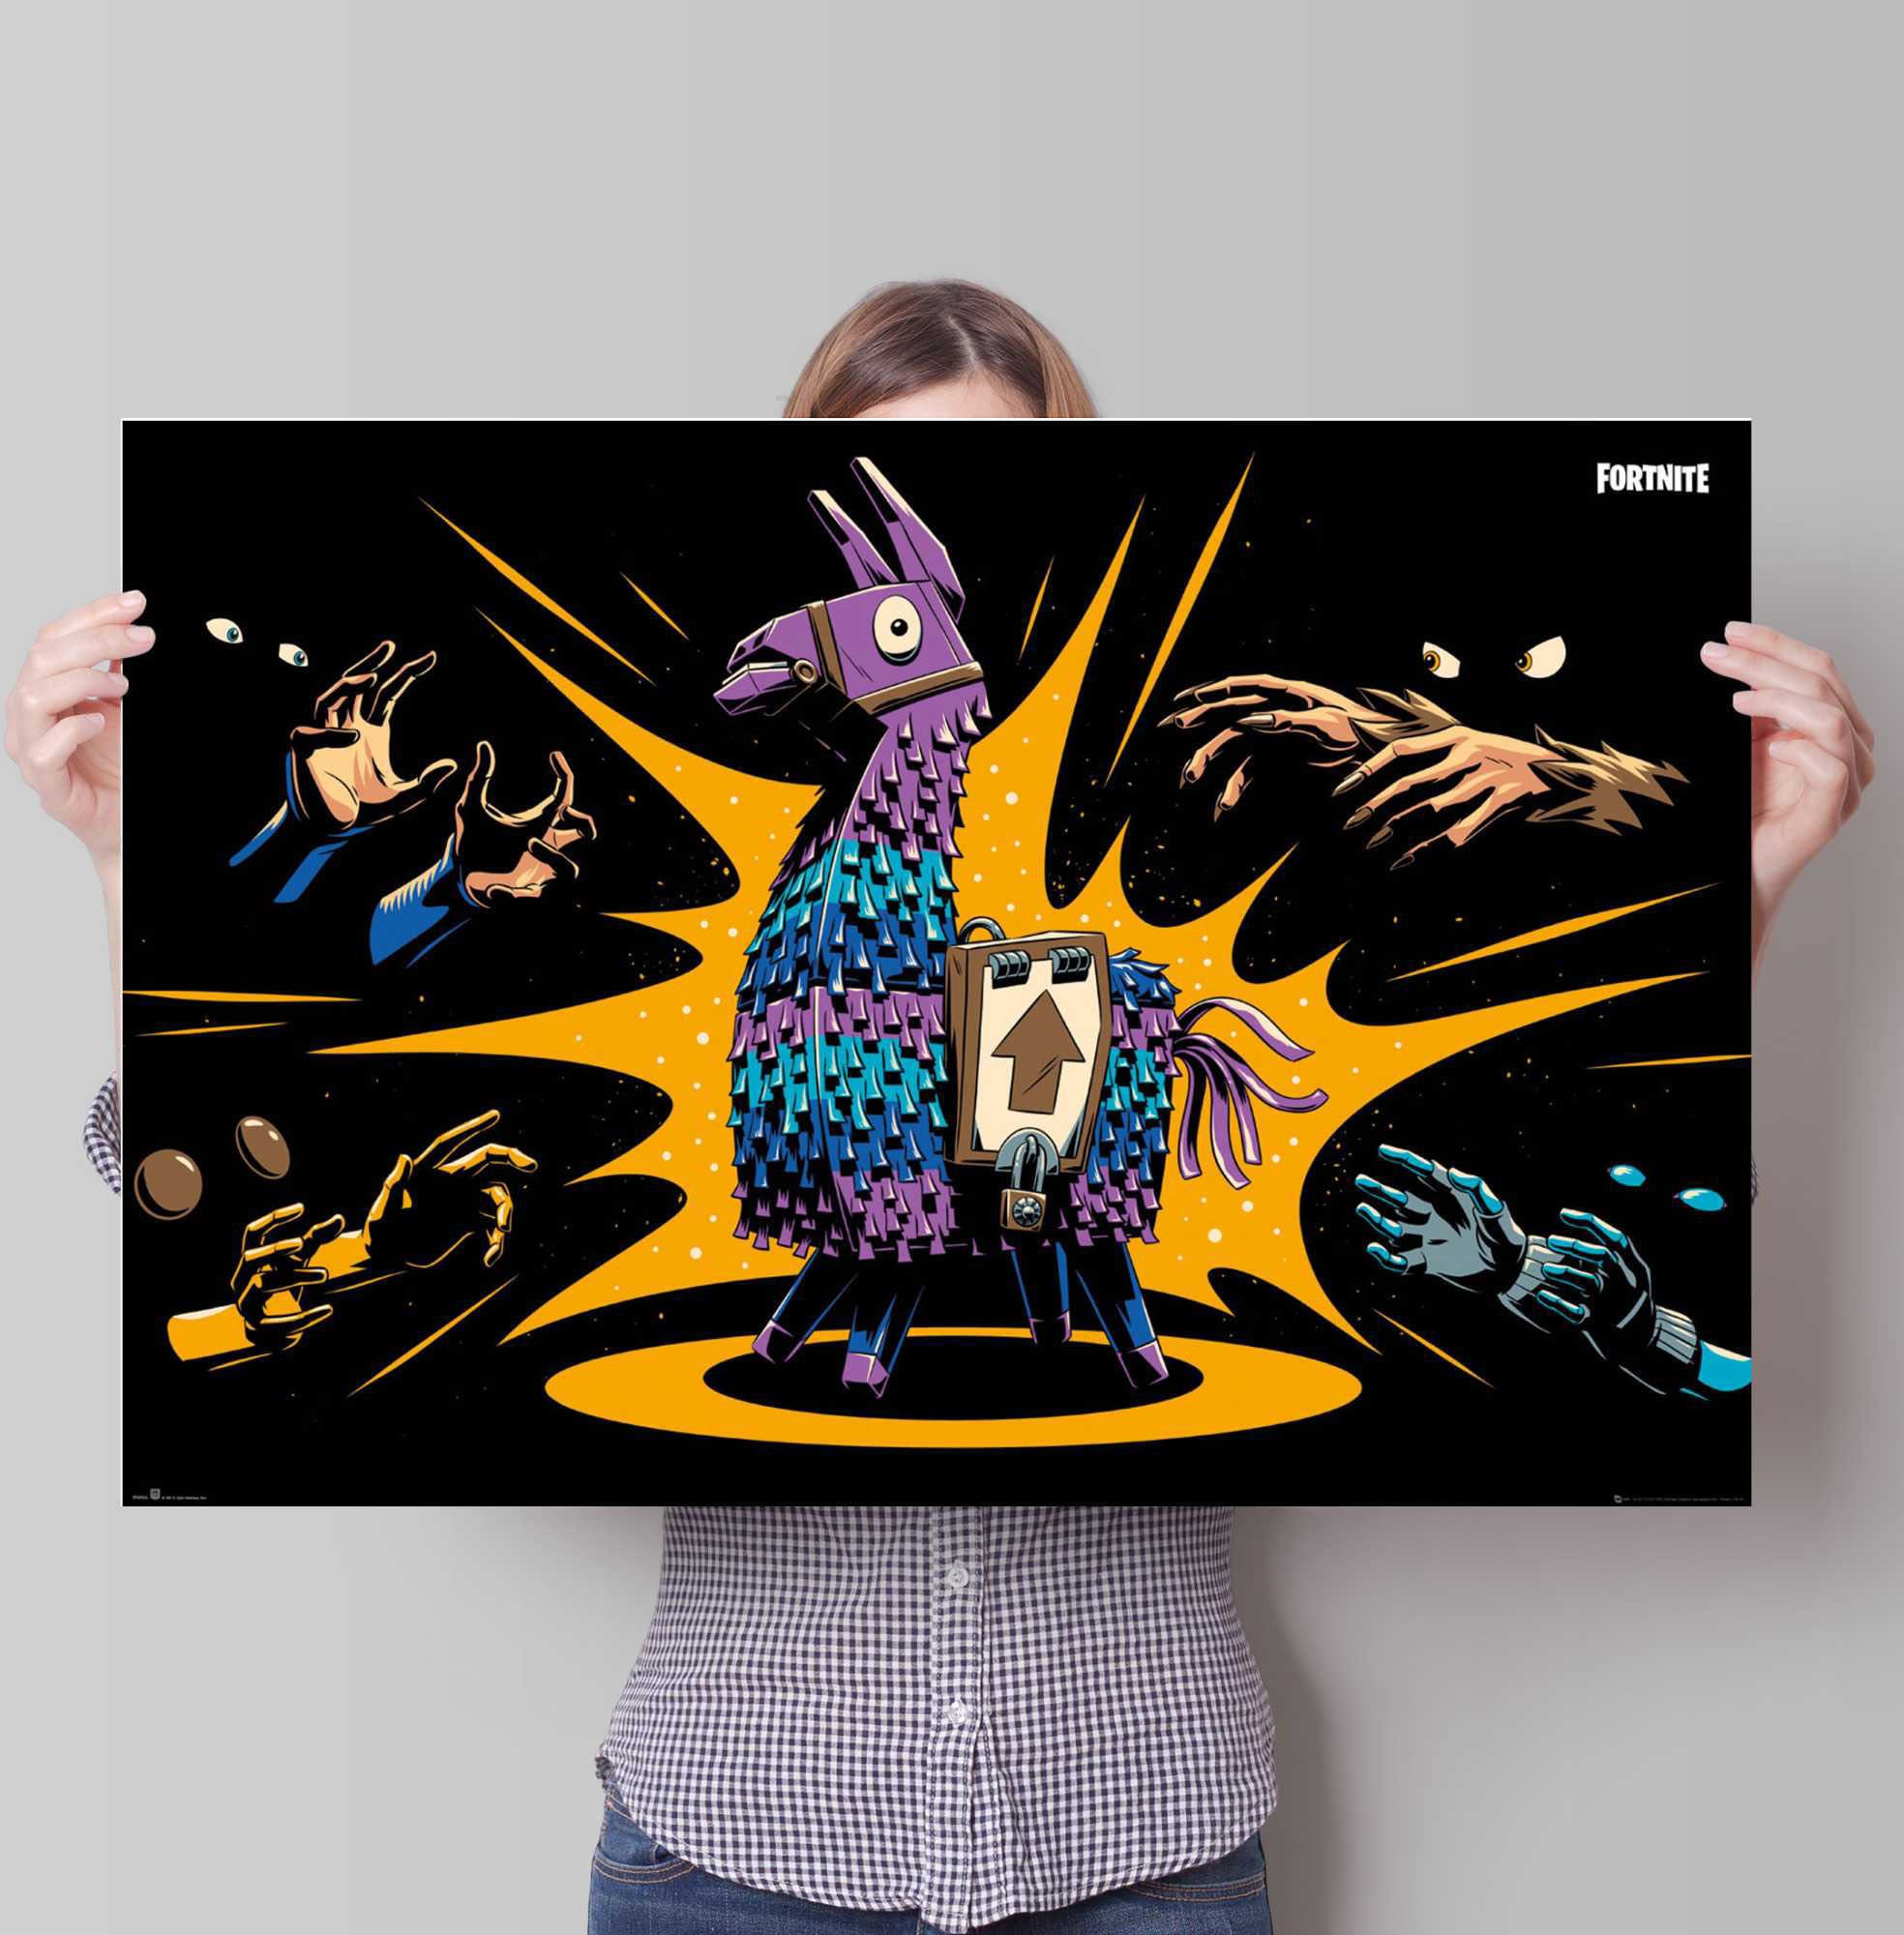 Reinders! Poster »Poster Spiele, bei OTTO Loot (1 - St.) Llama Game«, Fortnite online